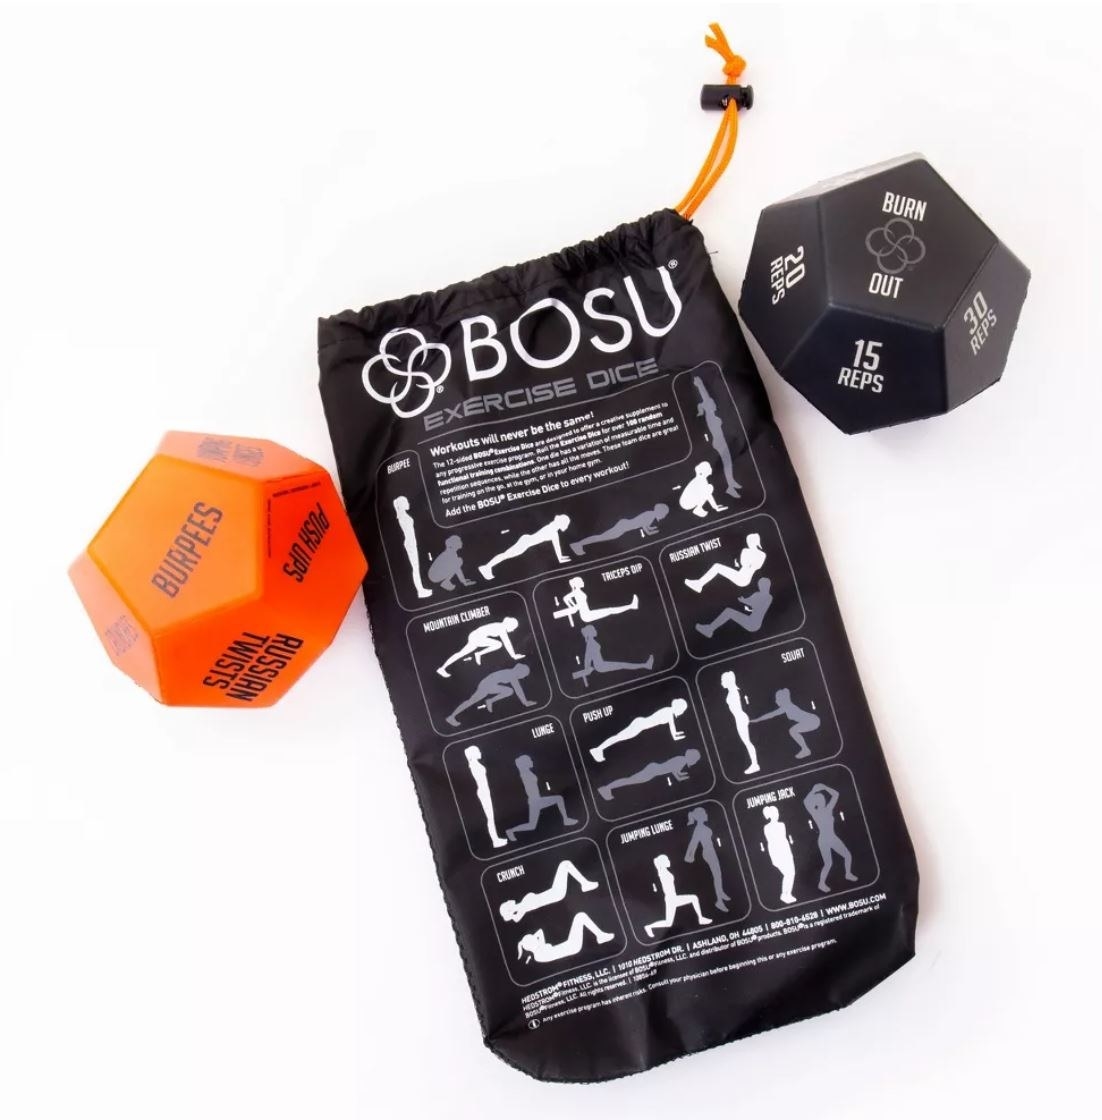 exercise dice